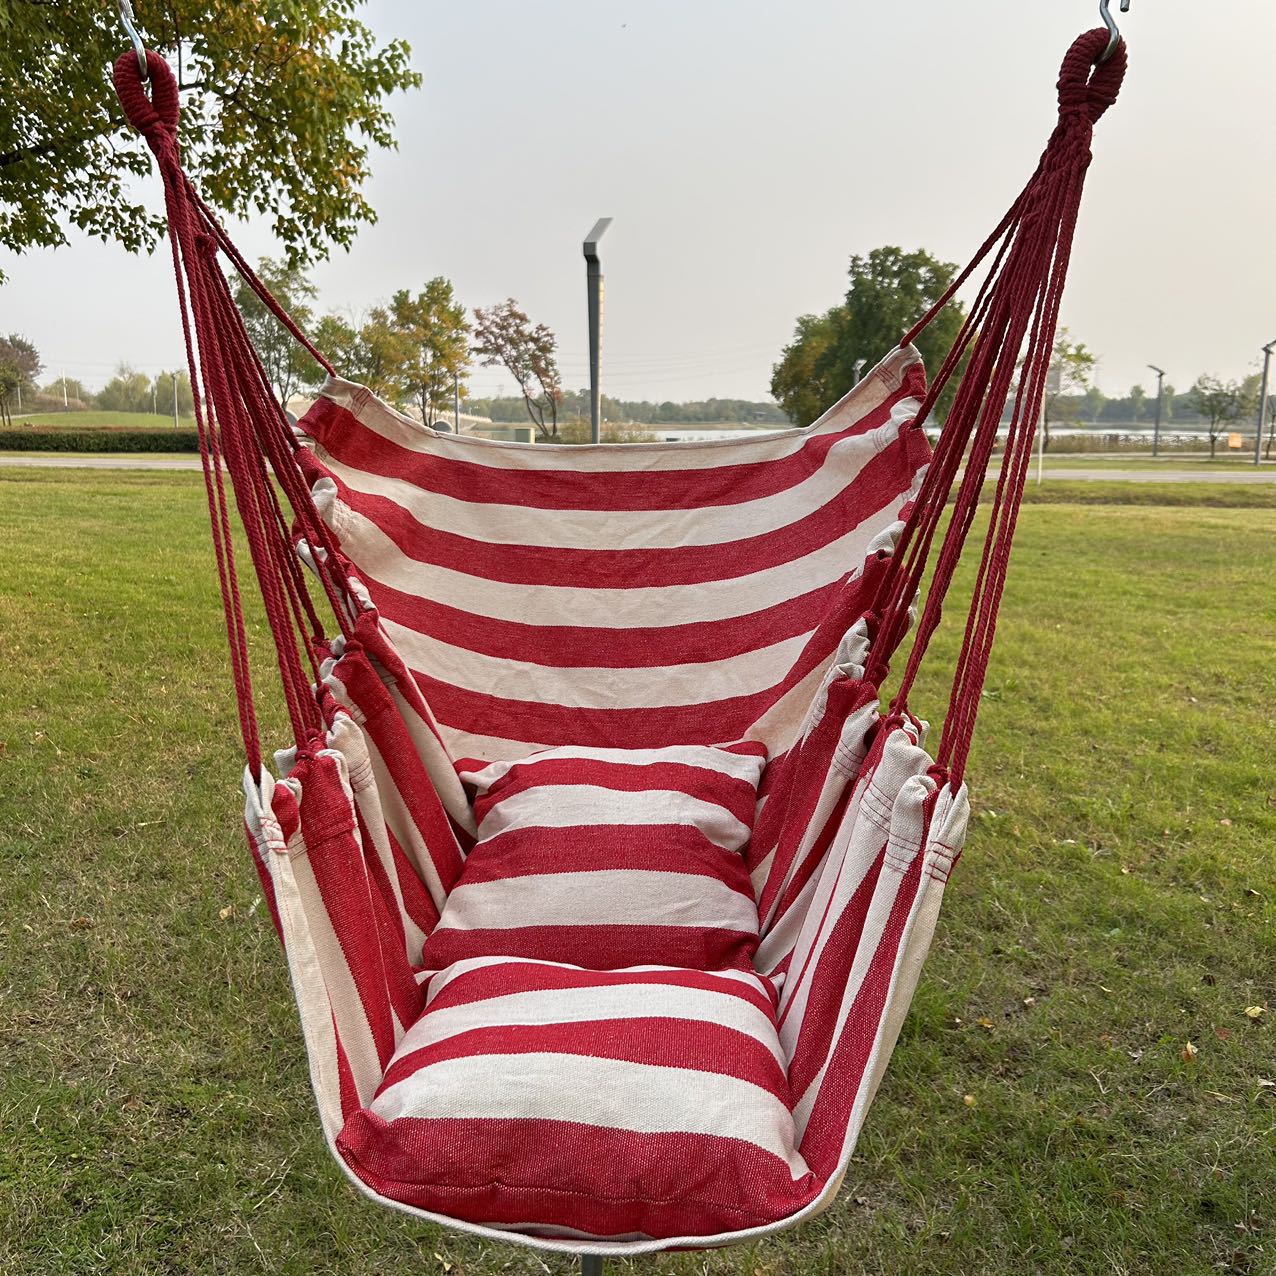 red and white stripes (Hanging chair and rope)